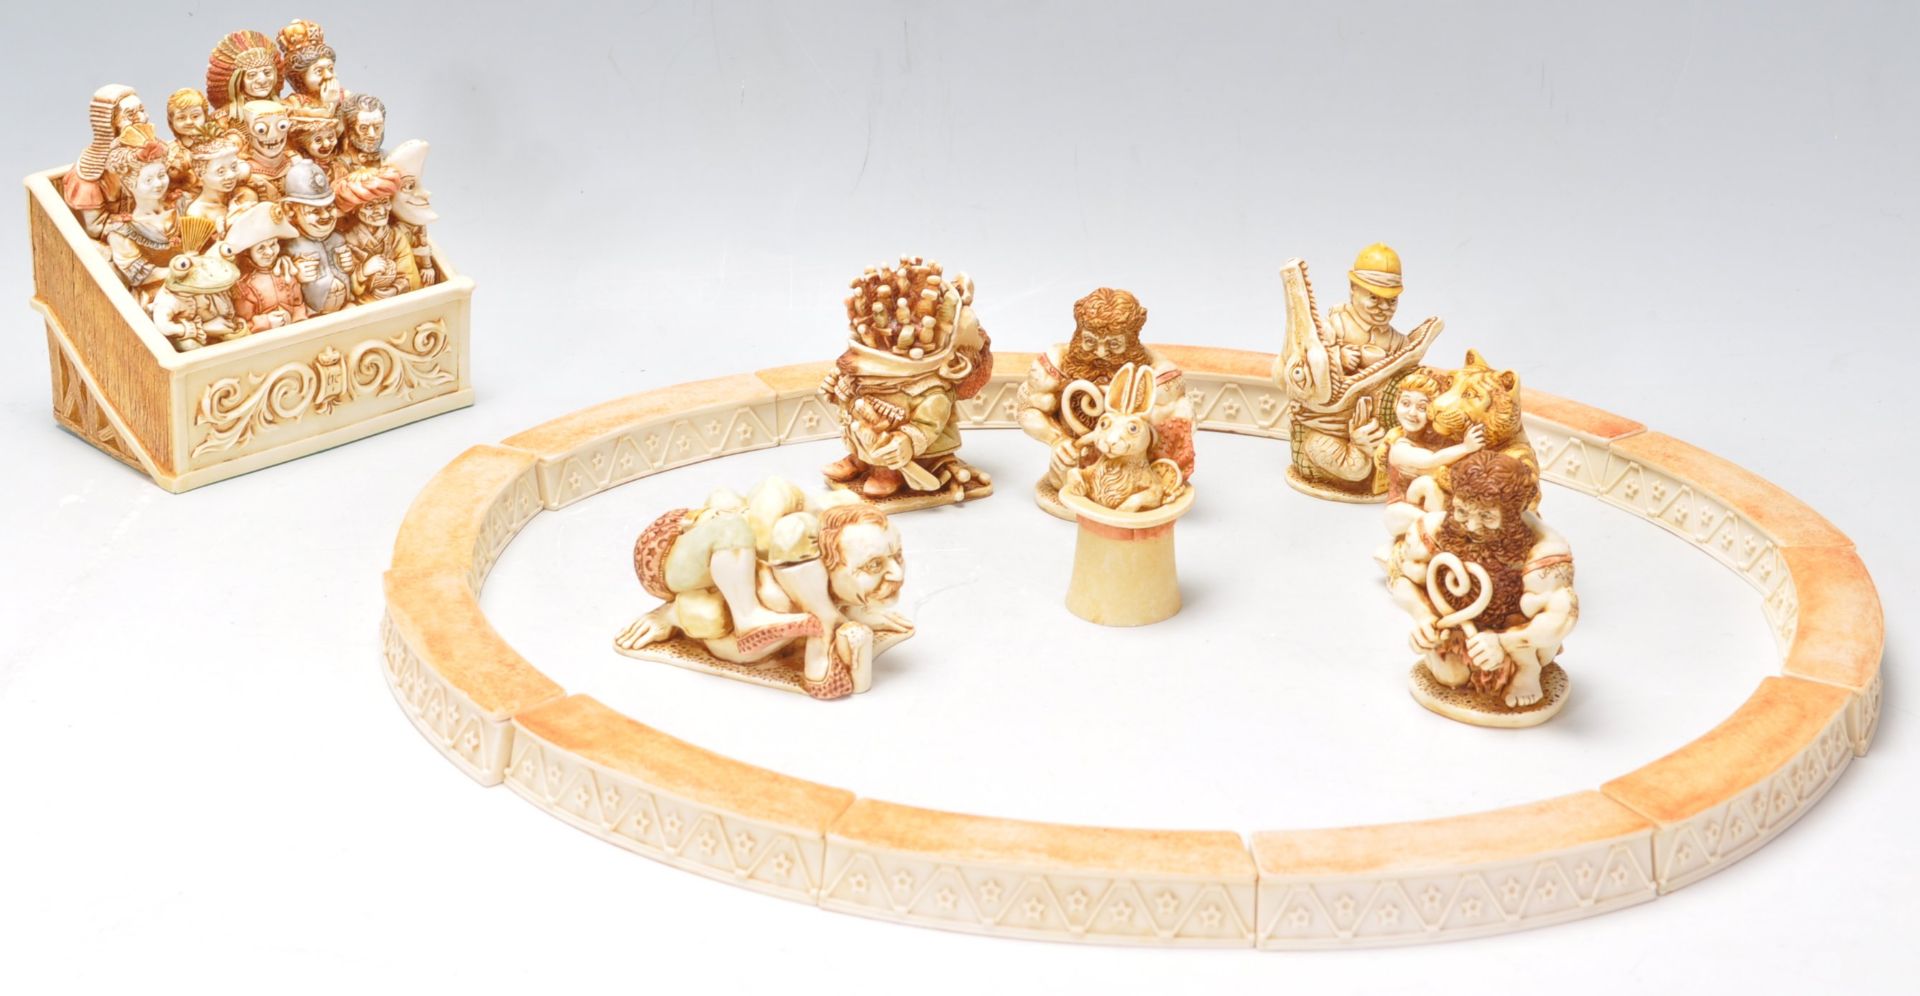 A group of Harmony Kingdom resin figurines in the form of a circus ring with spectators and